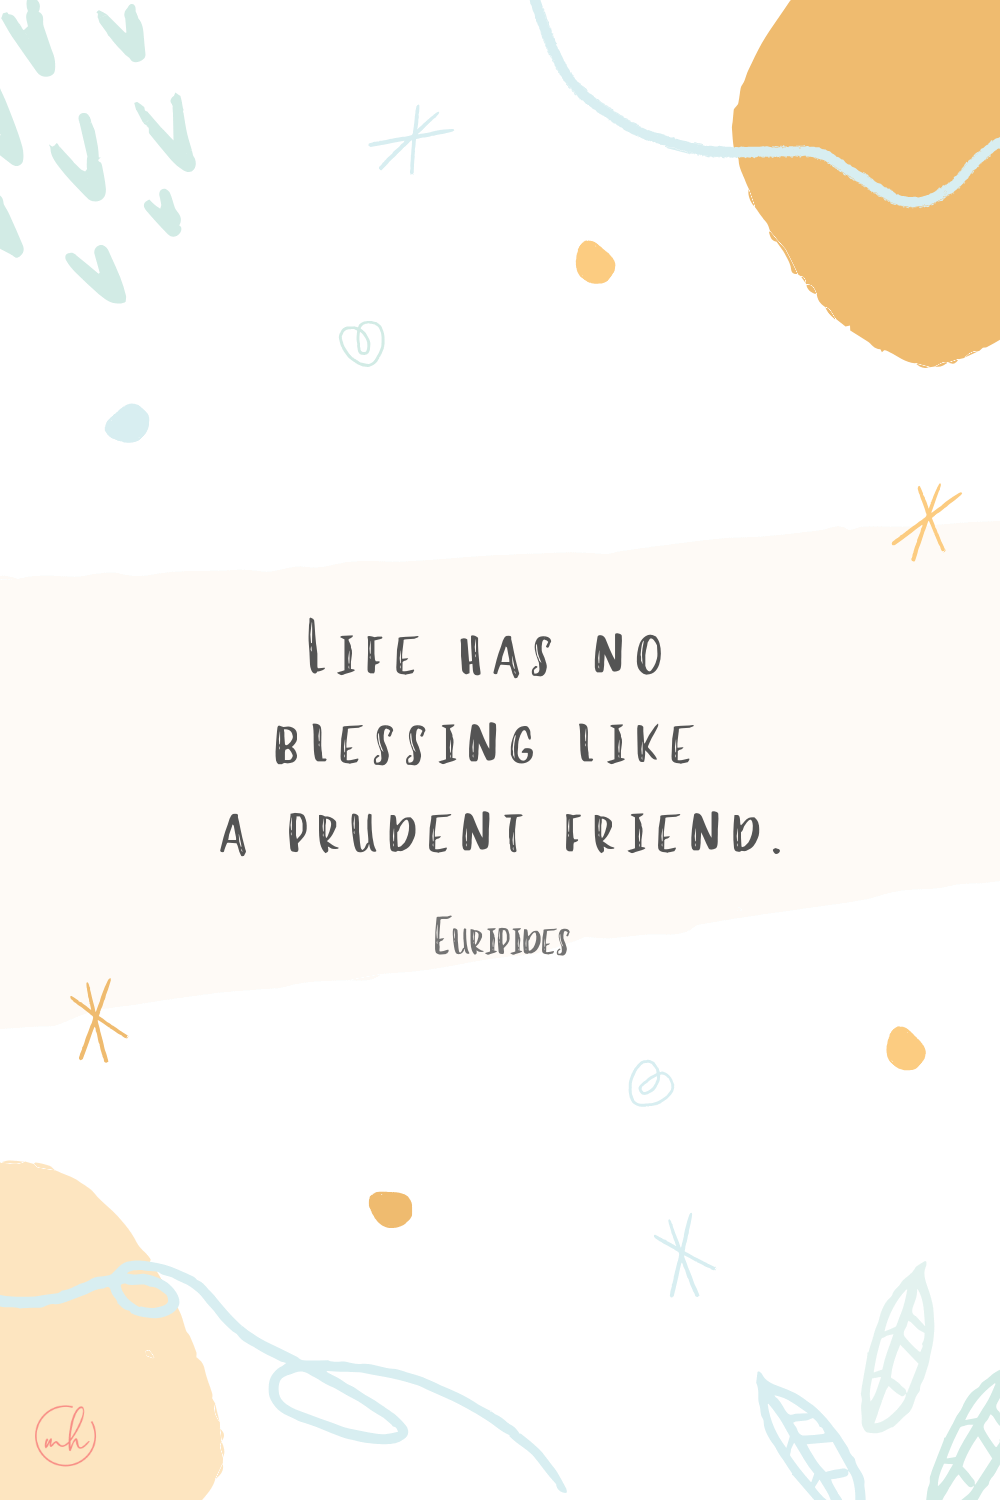 “Life has no blessing like a prudent friend.” - Euripides